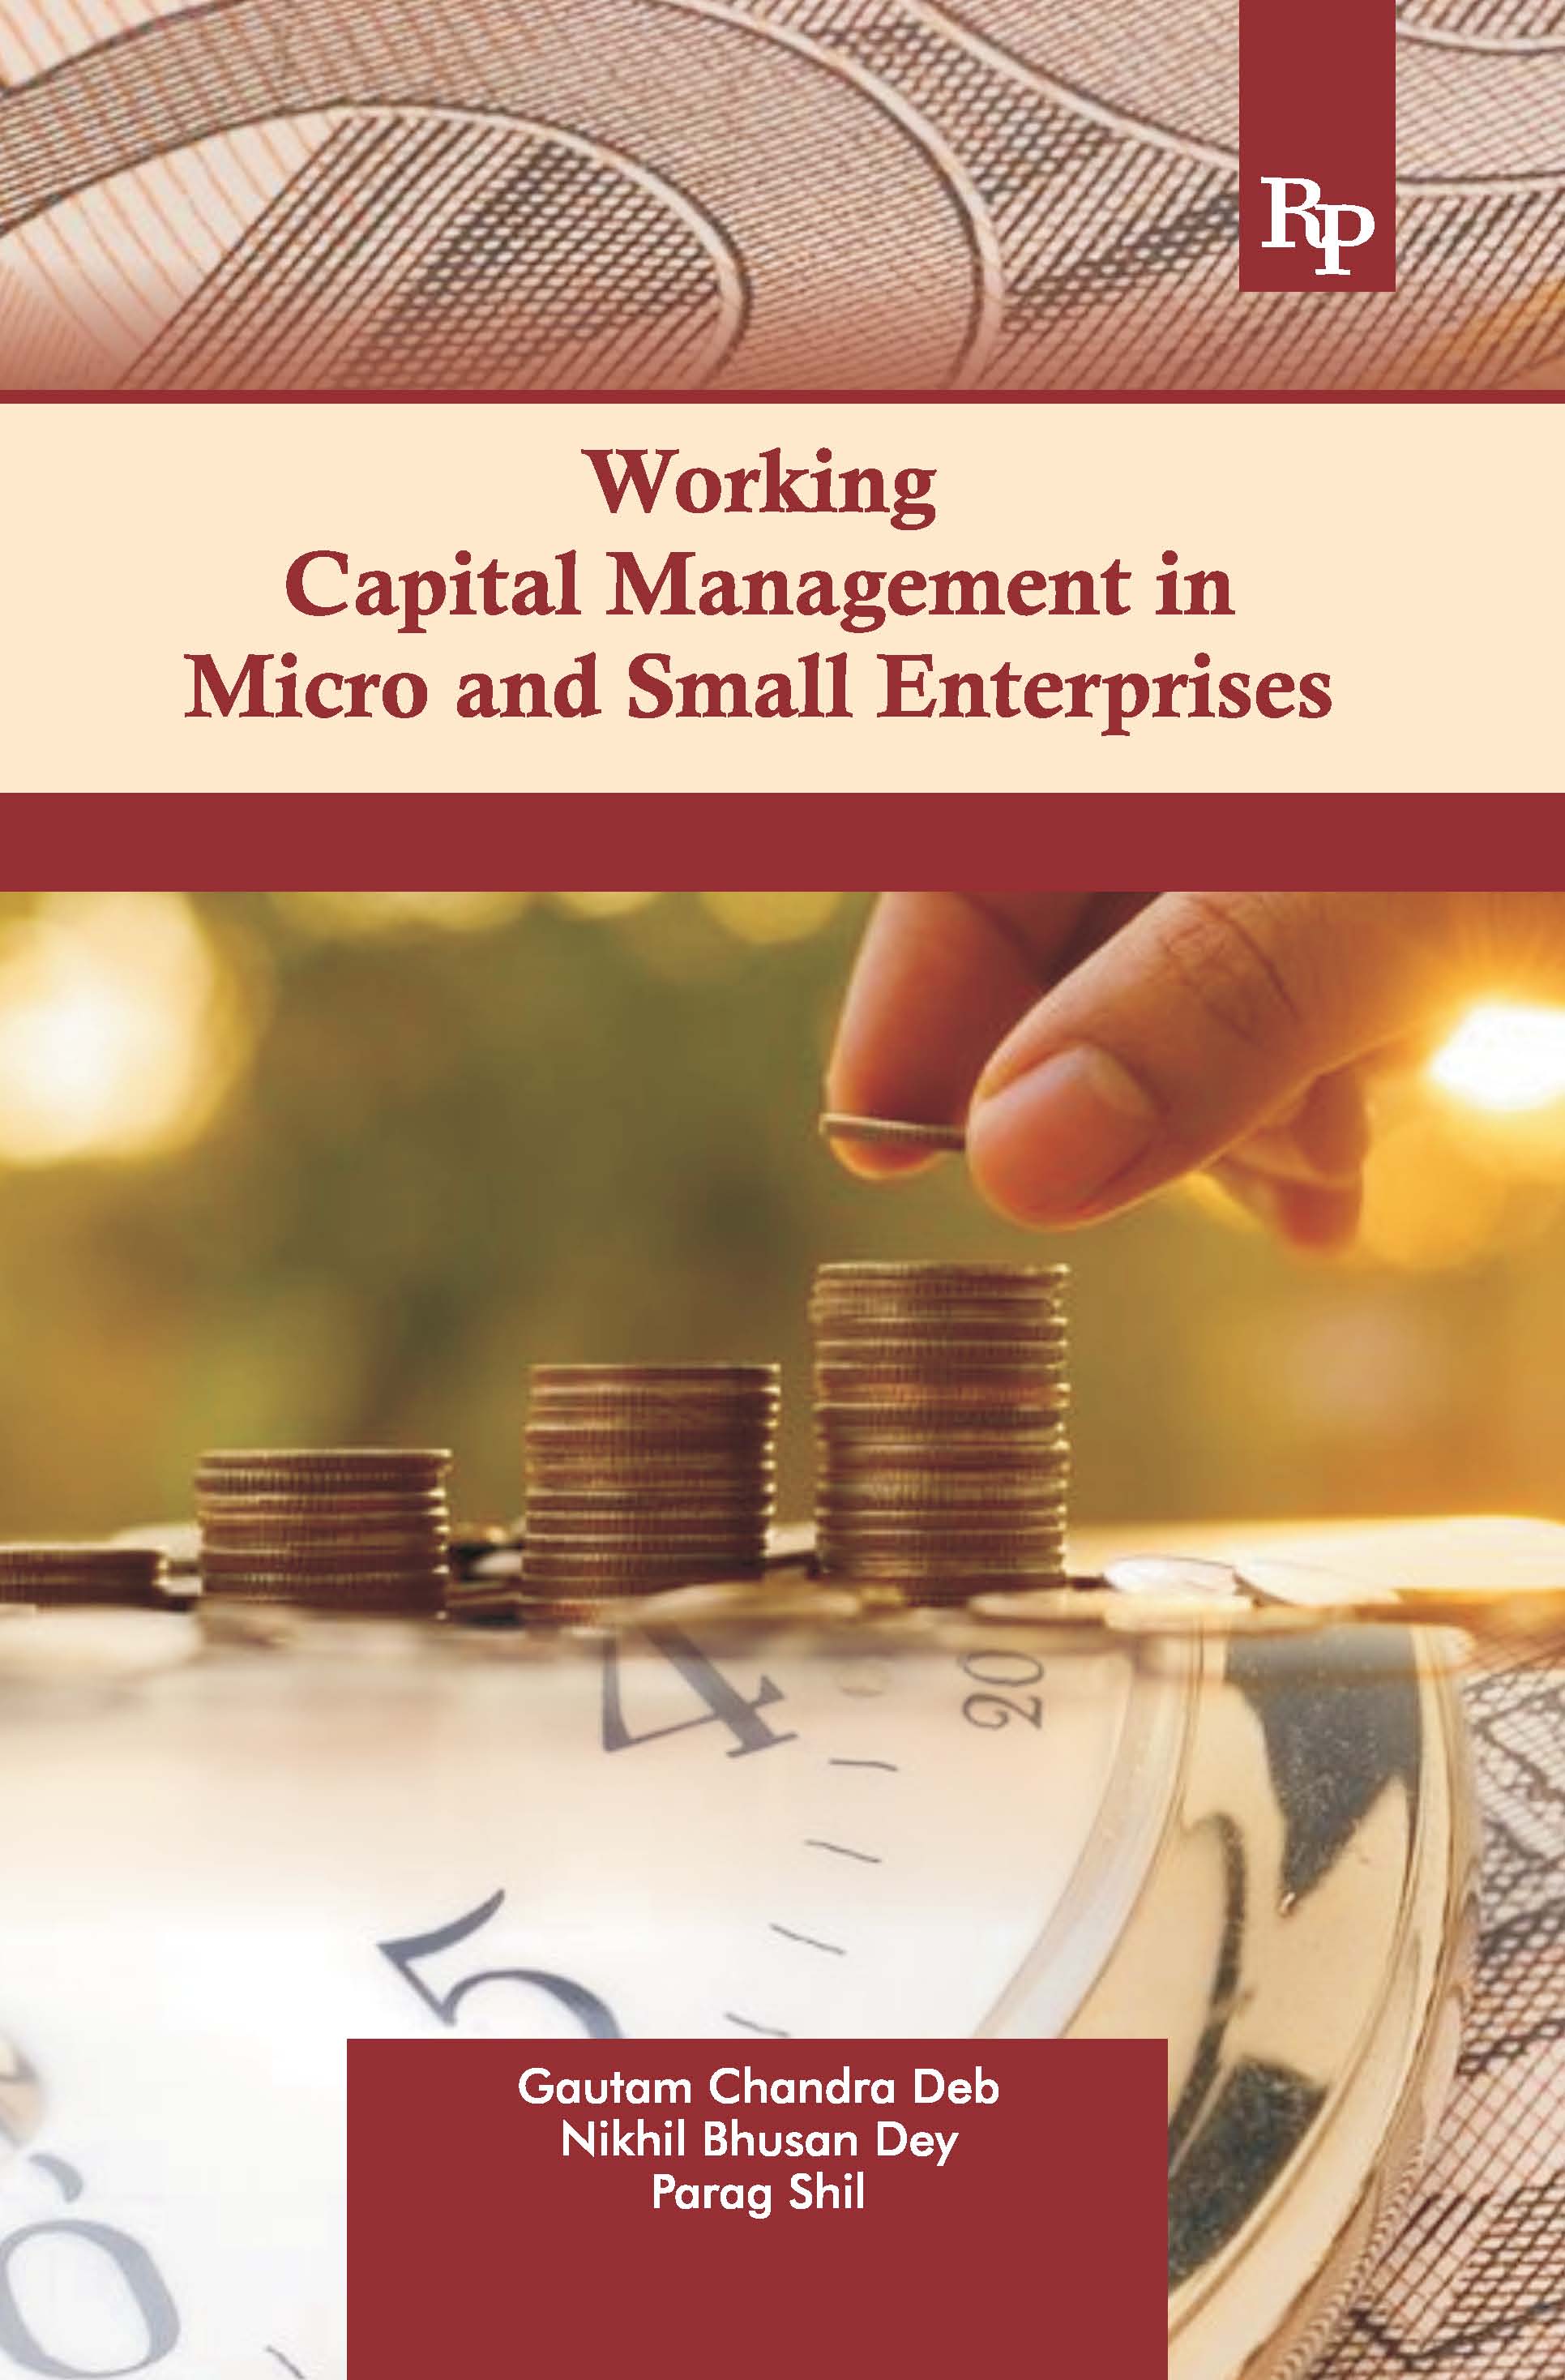 Working capital management in micro and small enterprises in Barka Vally.jpg